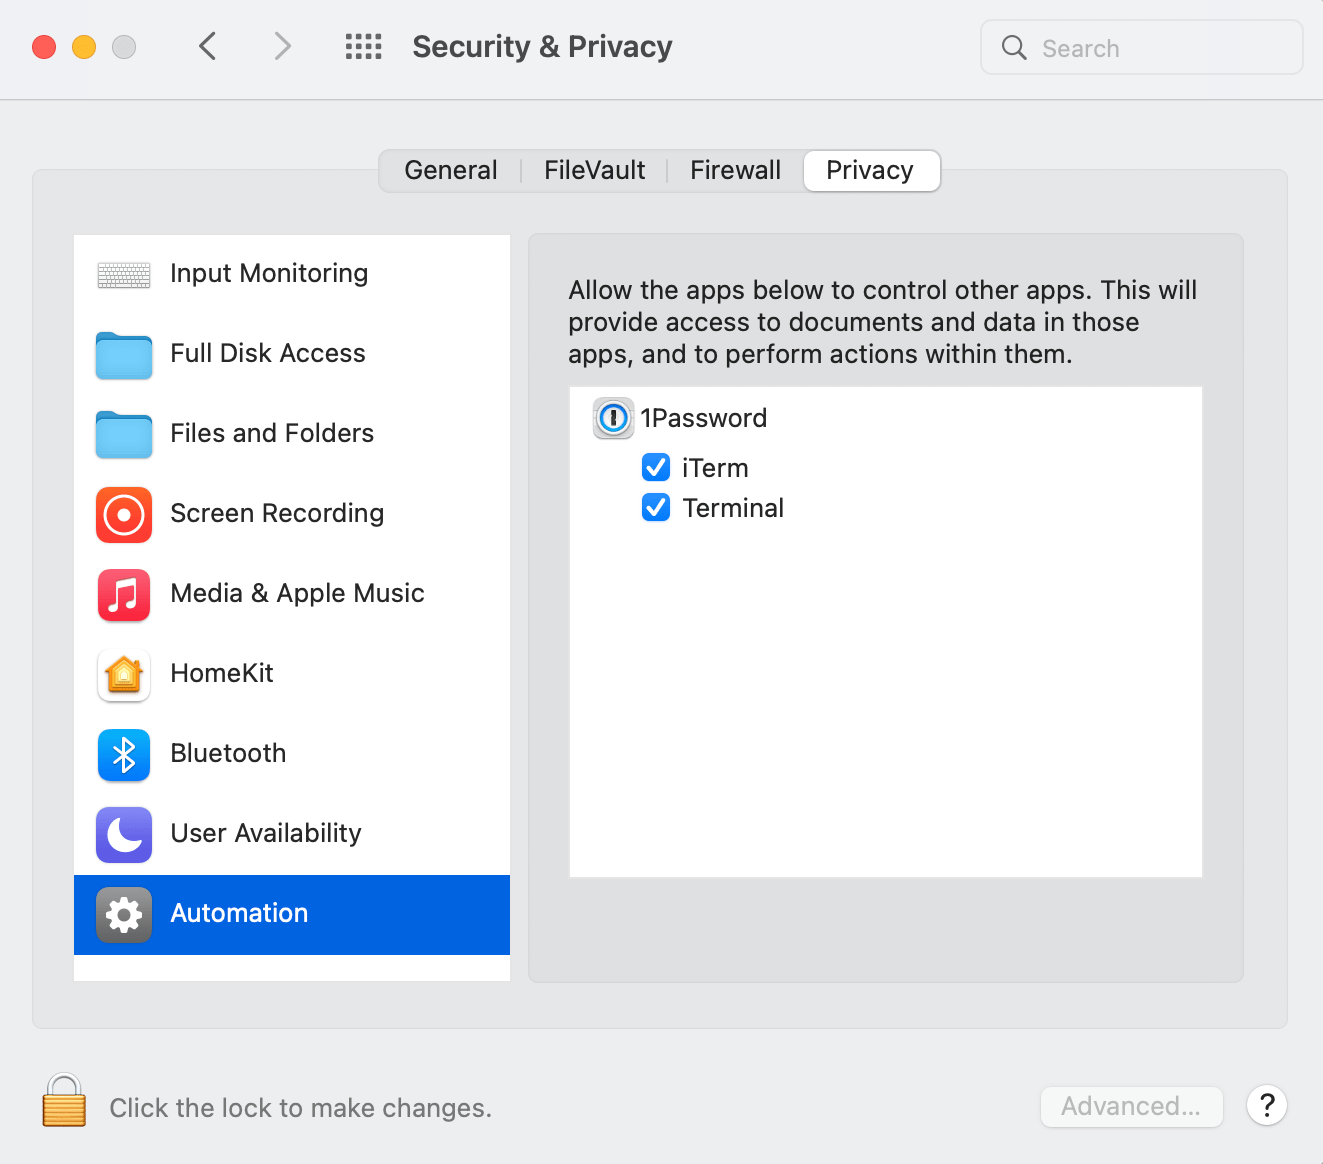 Turn on the Automation preference for 1Password